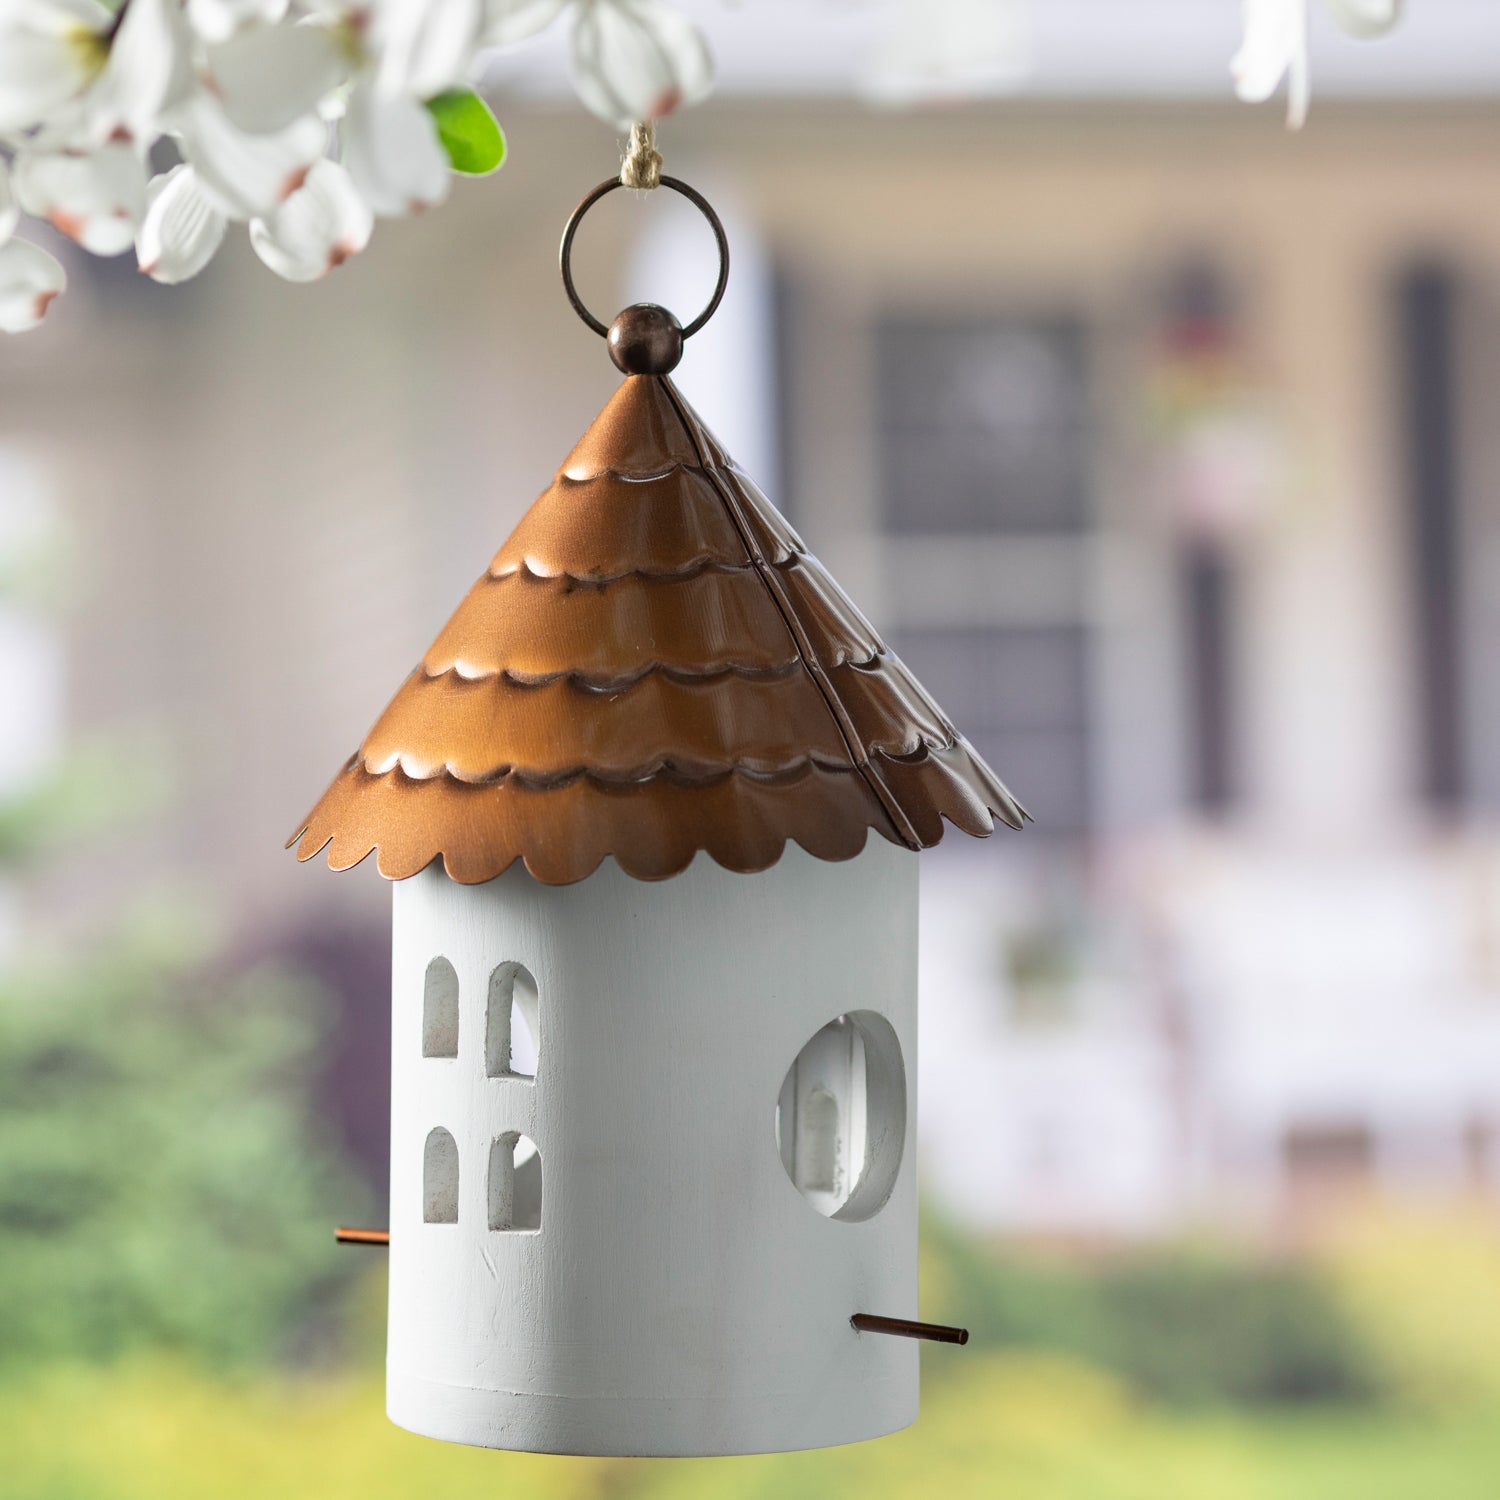 Plow & Hearth Wooden/Iron Hanging Birdhouse with Round Top